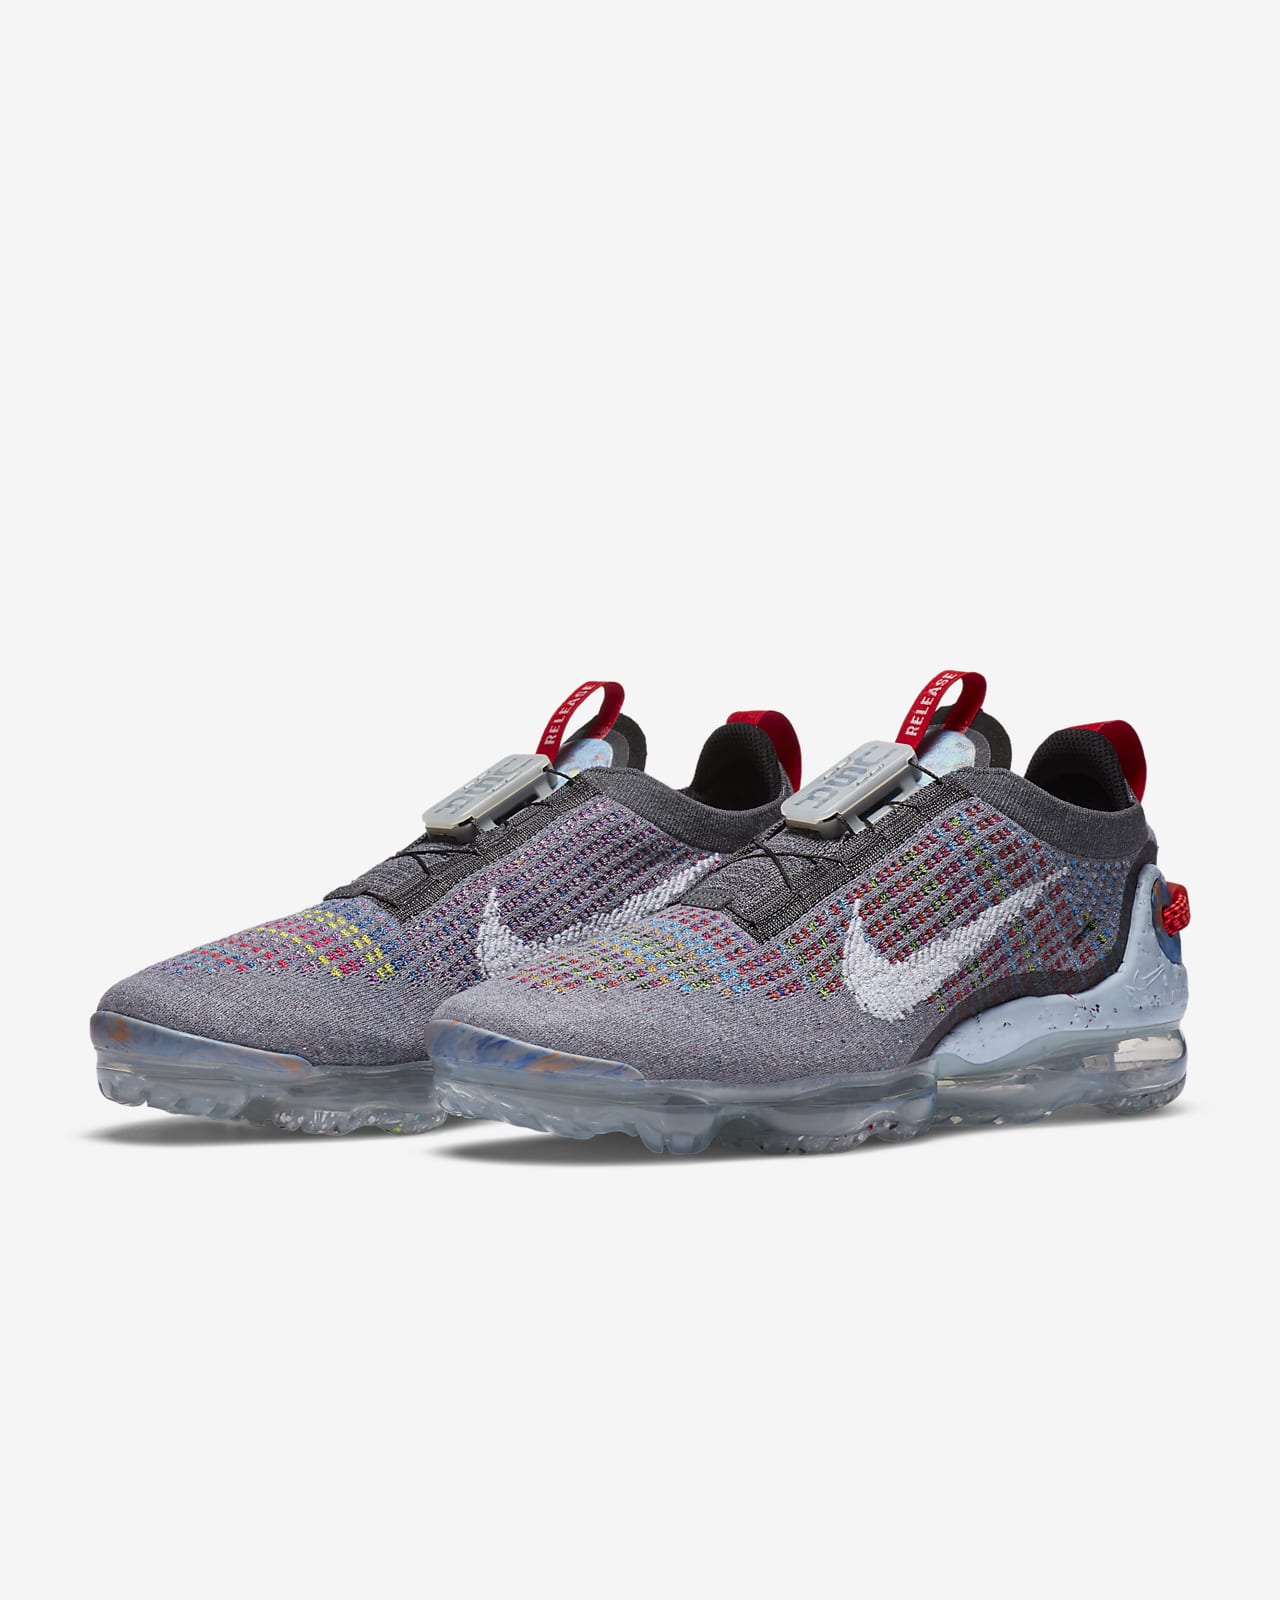 Nike The 10 Air Vapormax FK Off White 2020 in 2020